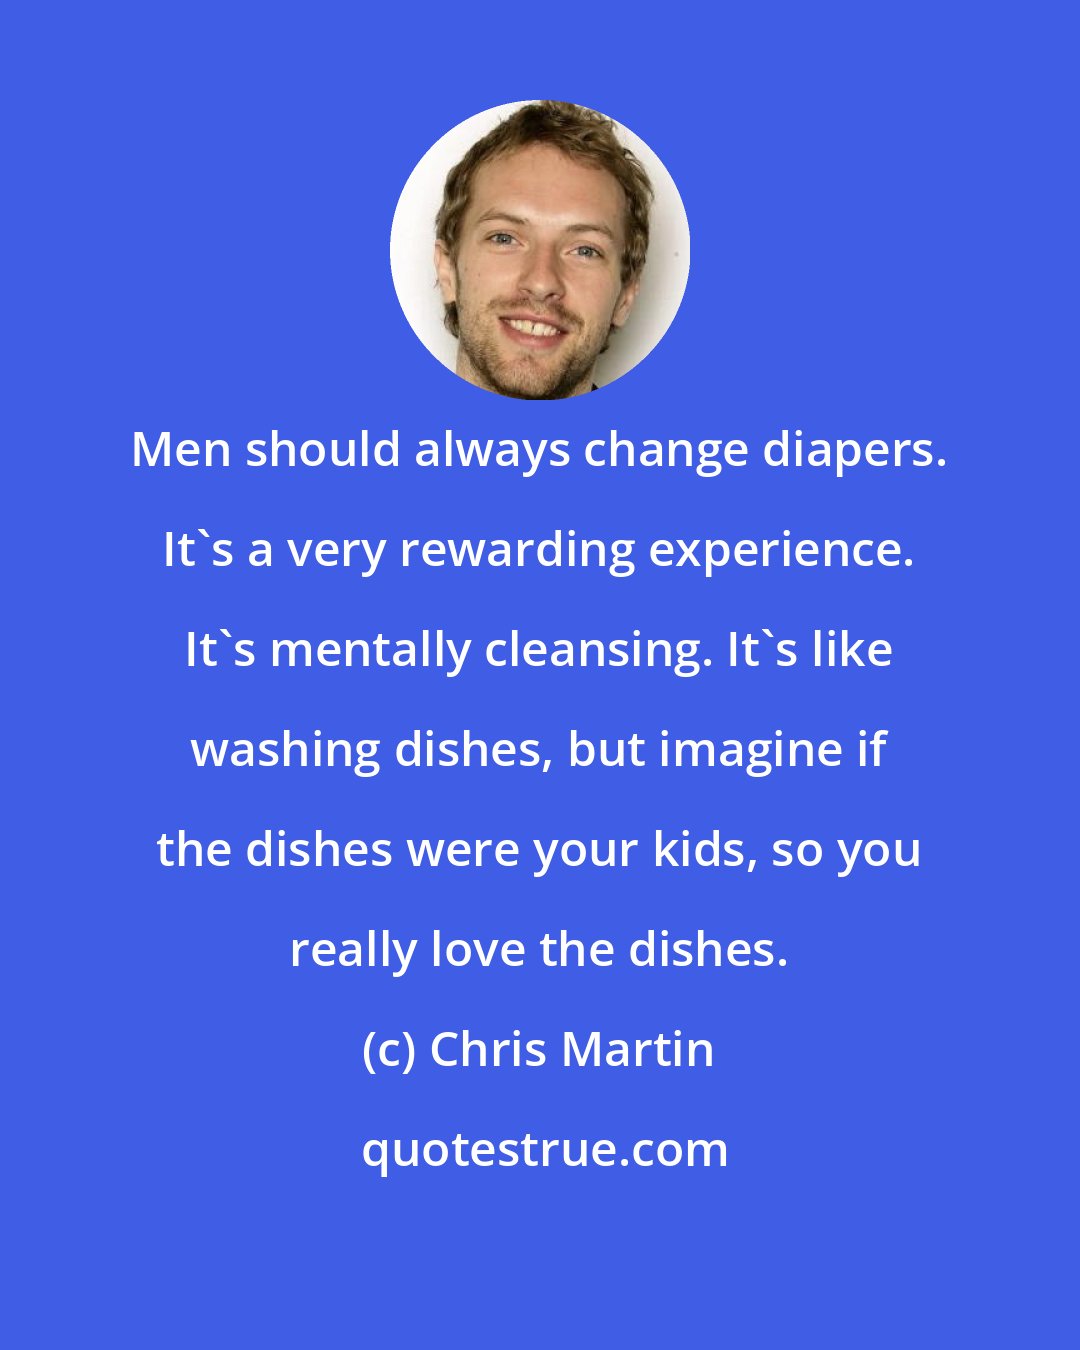 Chris Martin: Men should always change diapers. It's a very rewarding experience. It's mentally cleansing. It's like washing dishes, but imagine if the dishes were your kids, so you really love the dishes.